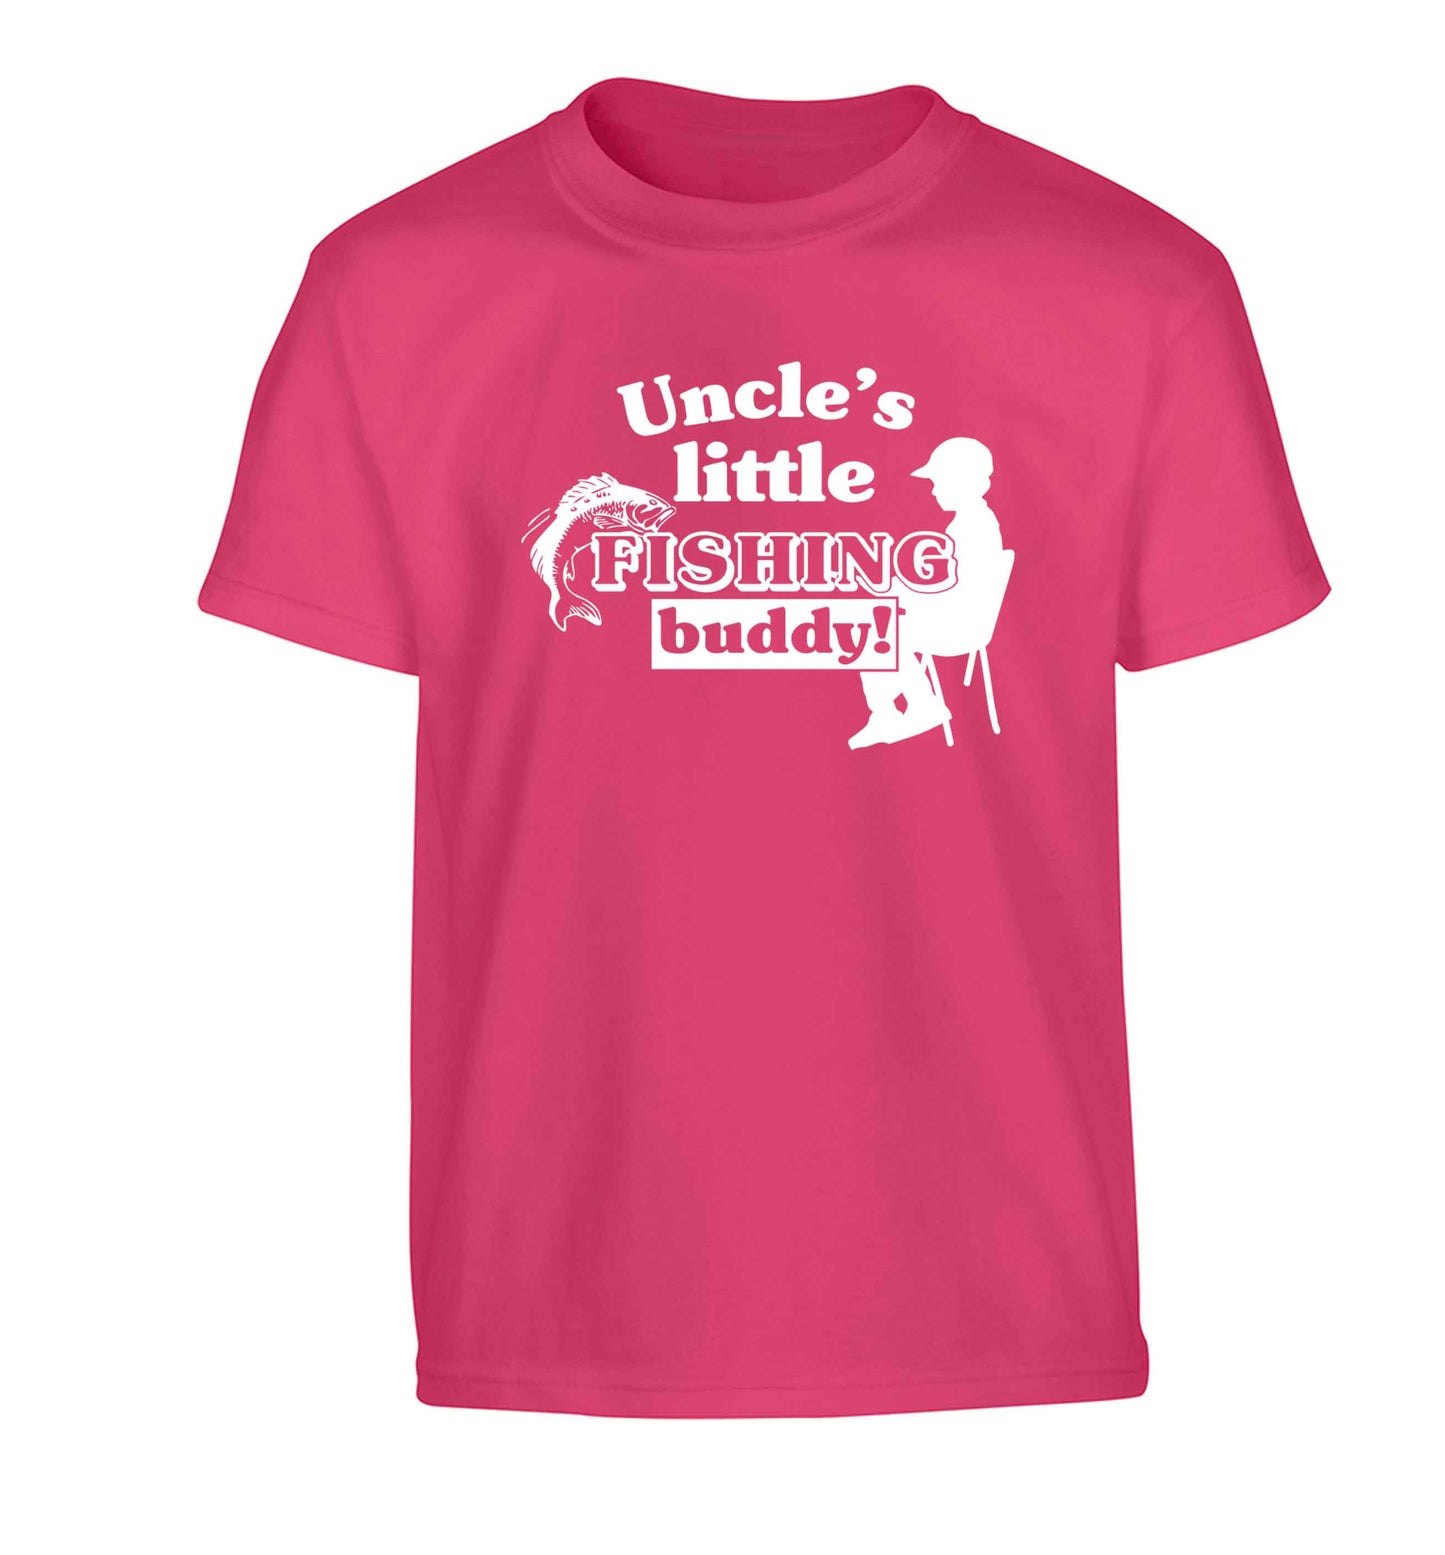 Uncle's little fishing buddy Children's pink Tshirt 12-13 Years